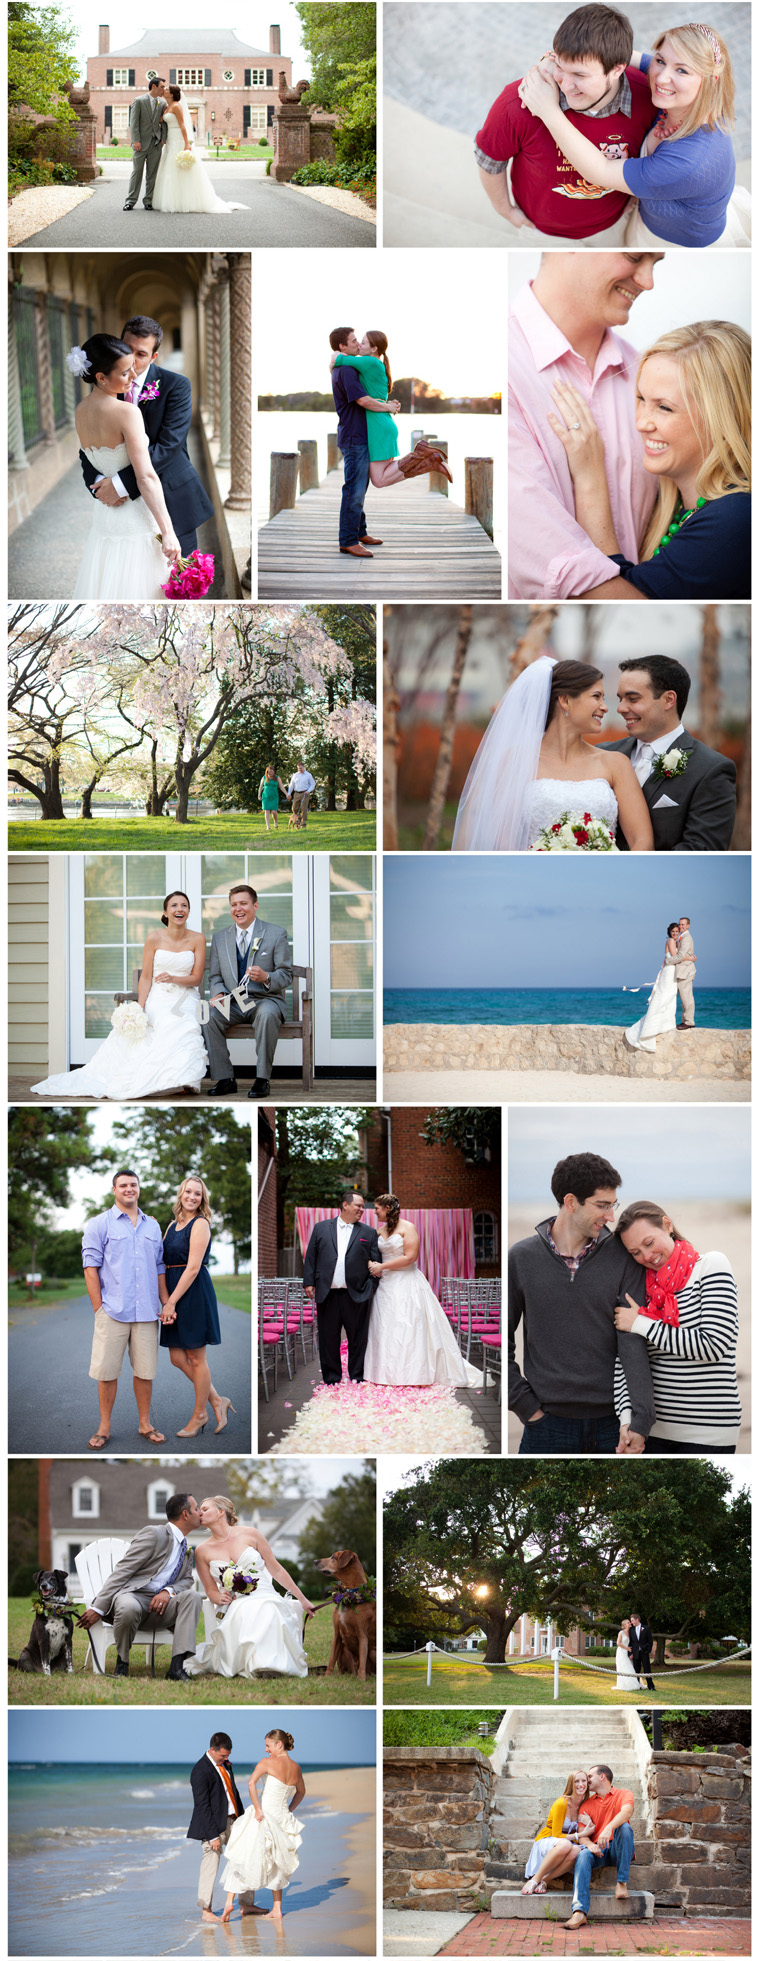 Win a free photo session contest, Annapolis and International Wedding Anniversary and Engagement Photographers